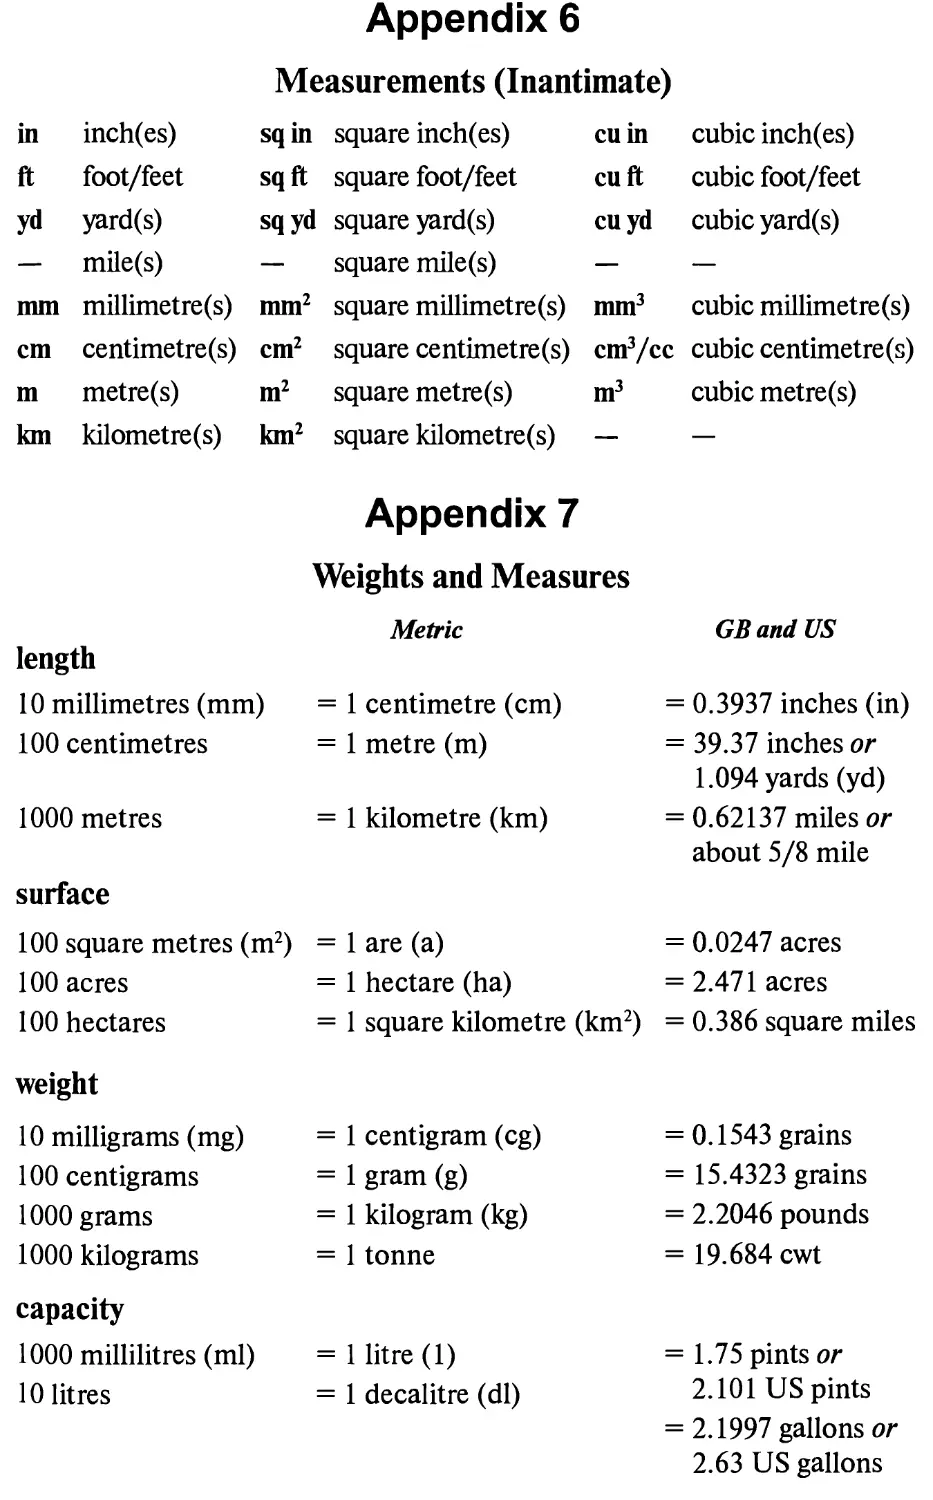 Appendix 7. Weights and Measures